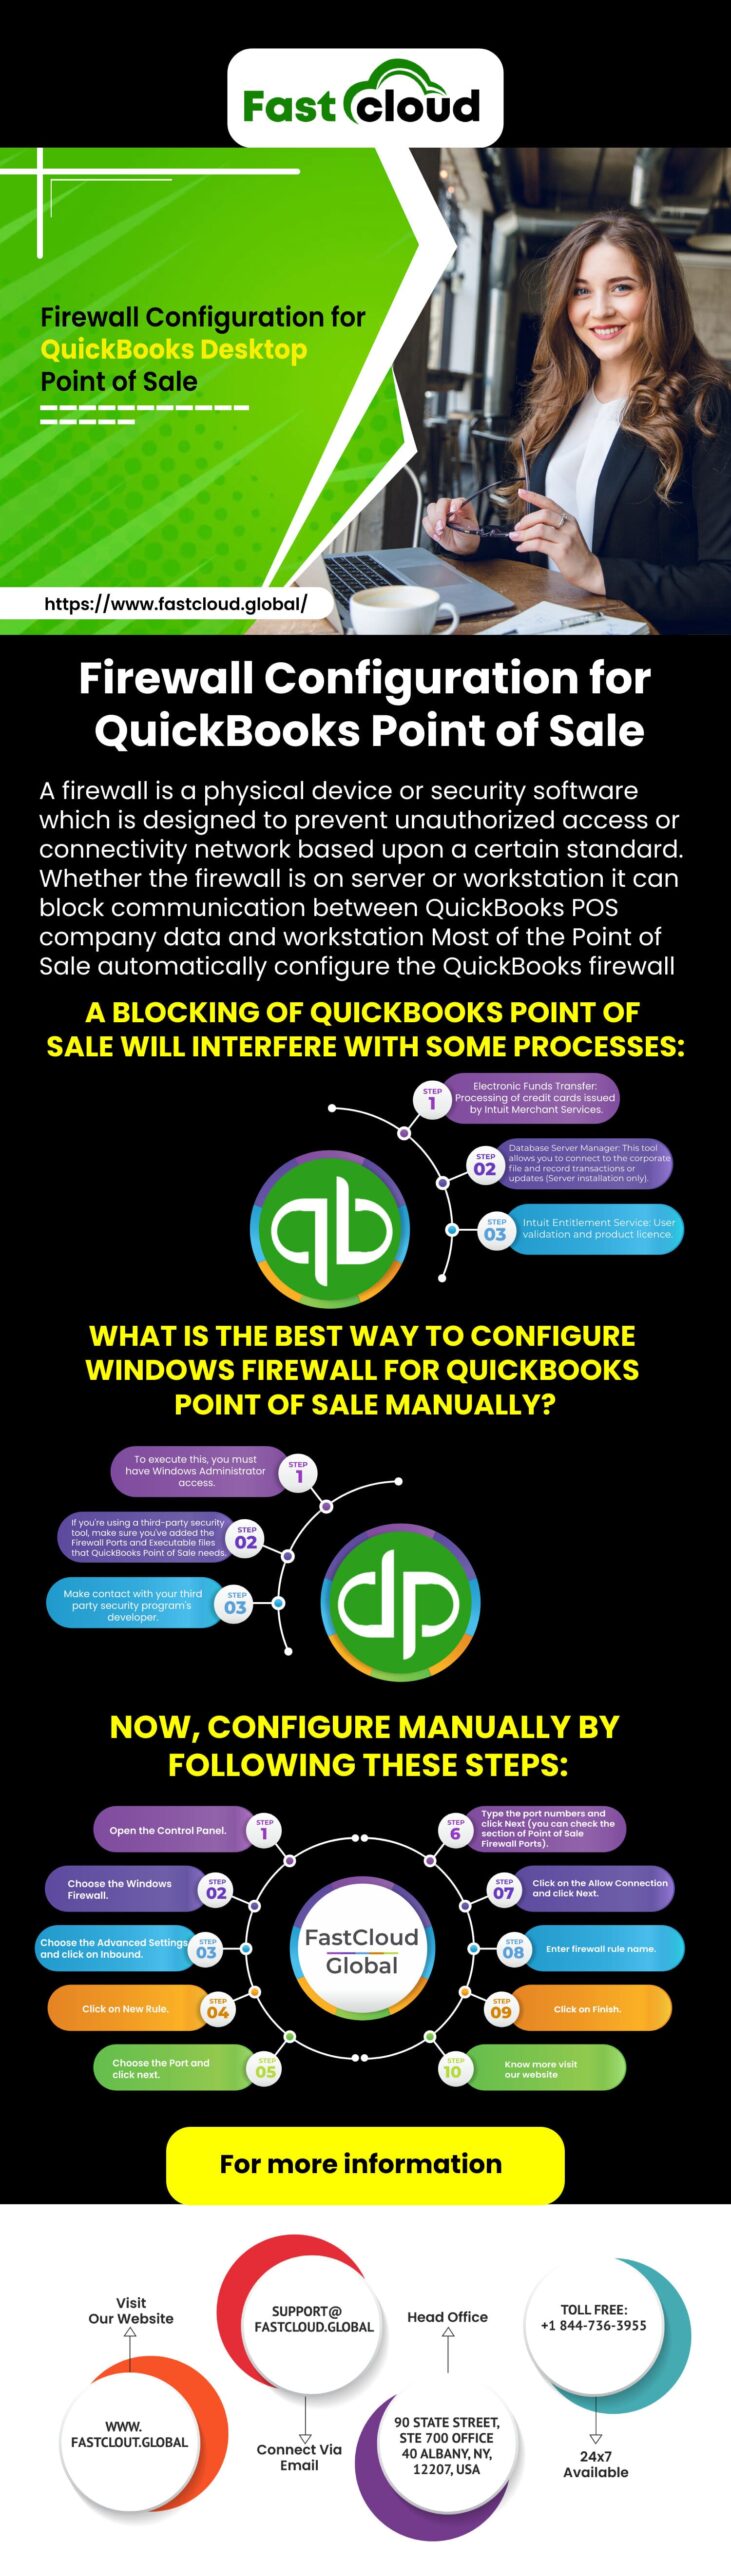 Firewall configuration for QuickBooks Point of Sale